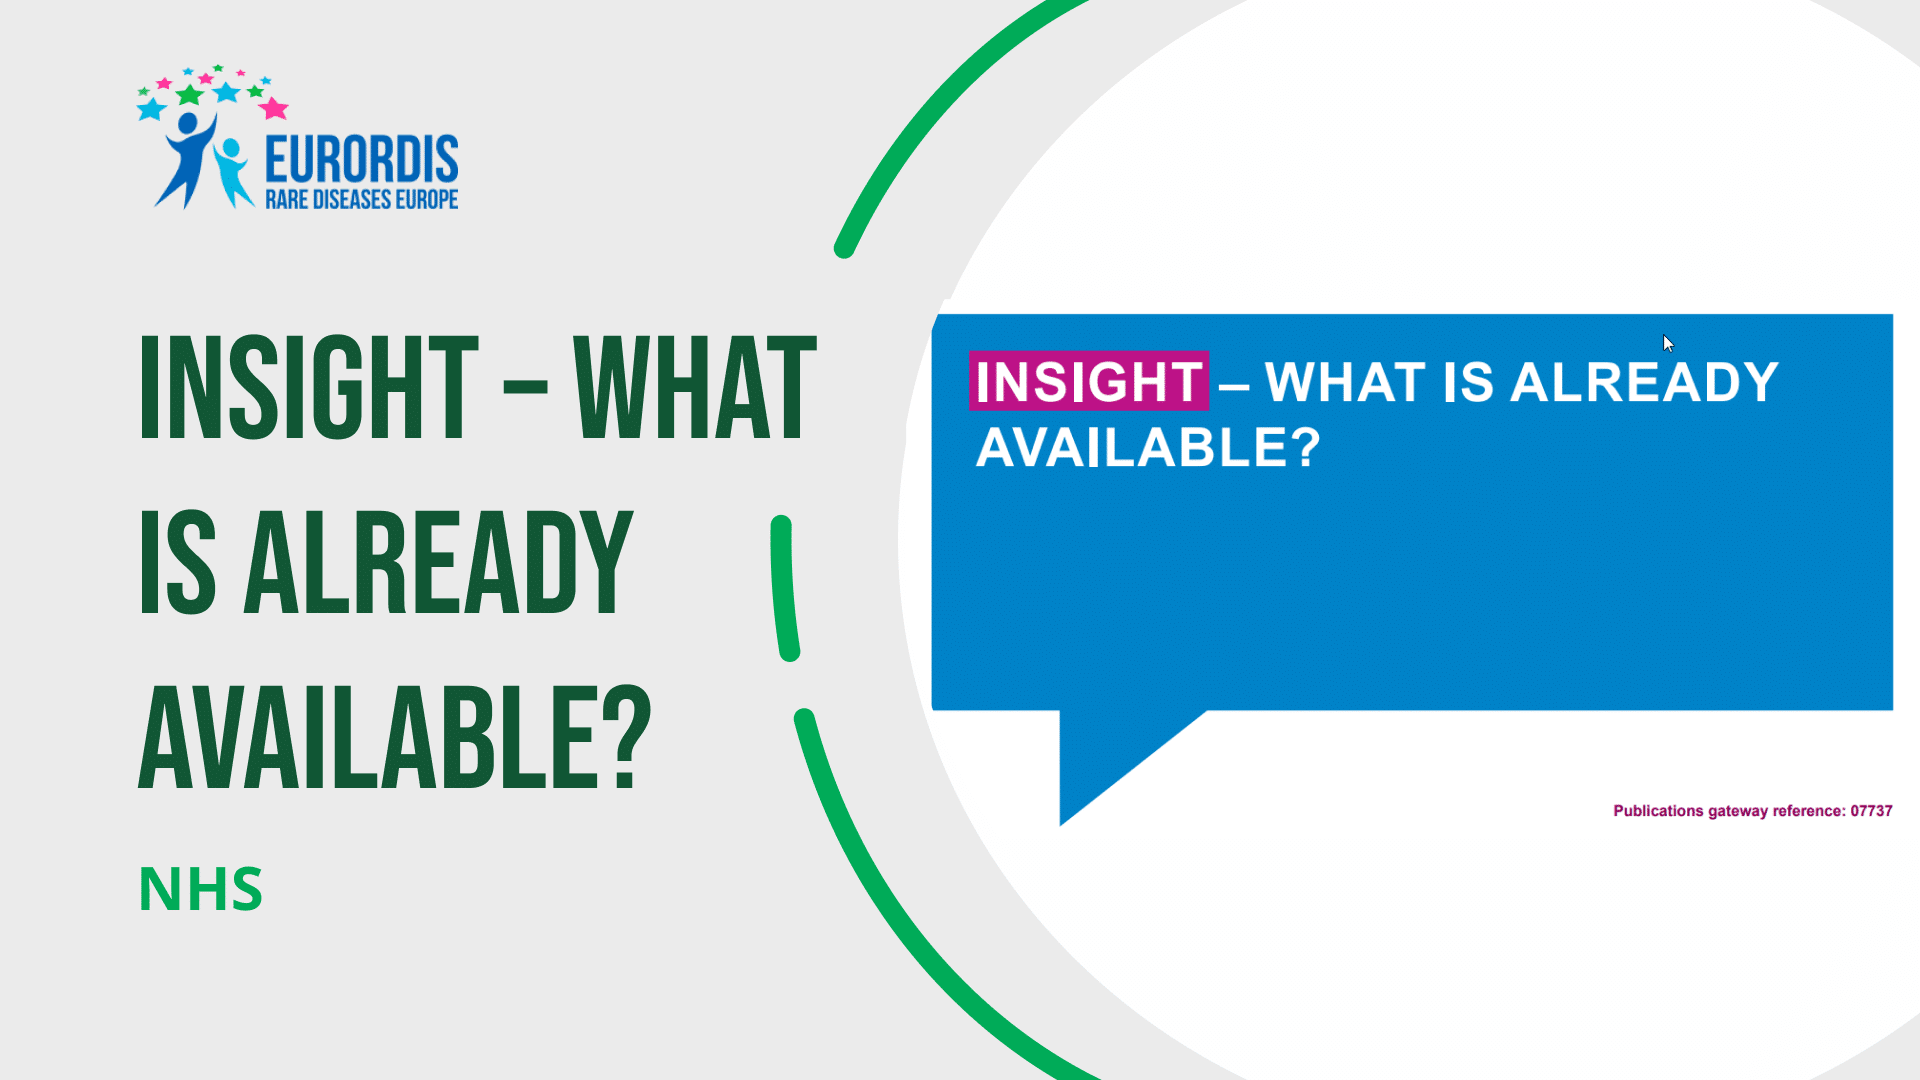 Insight – What is already available?